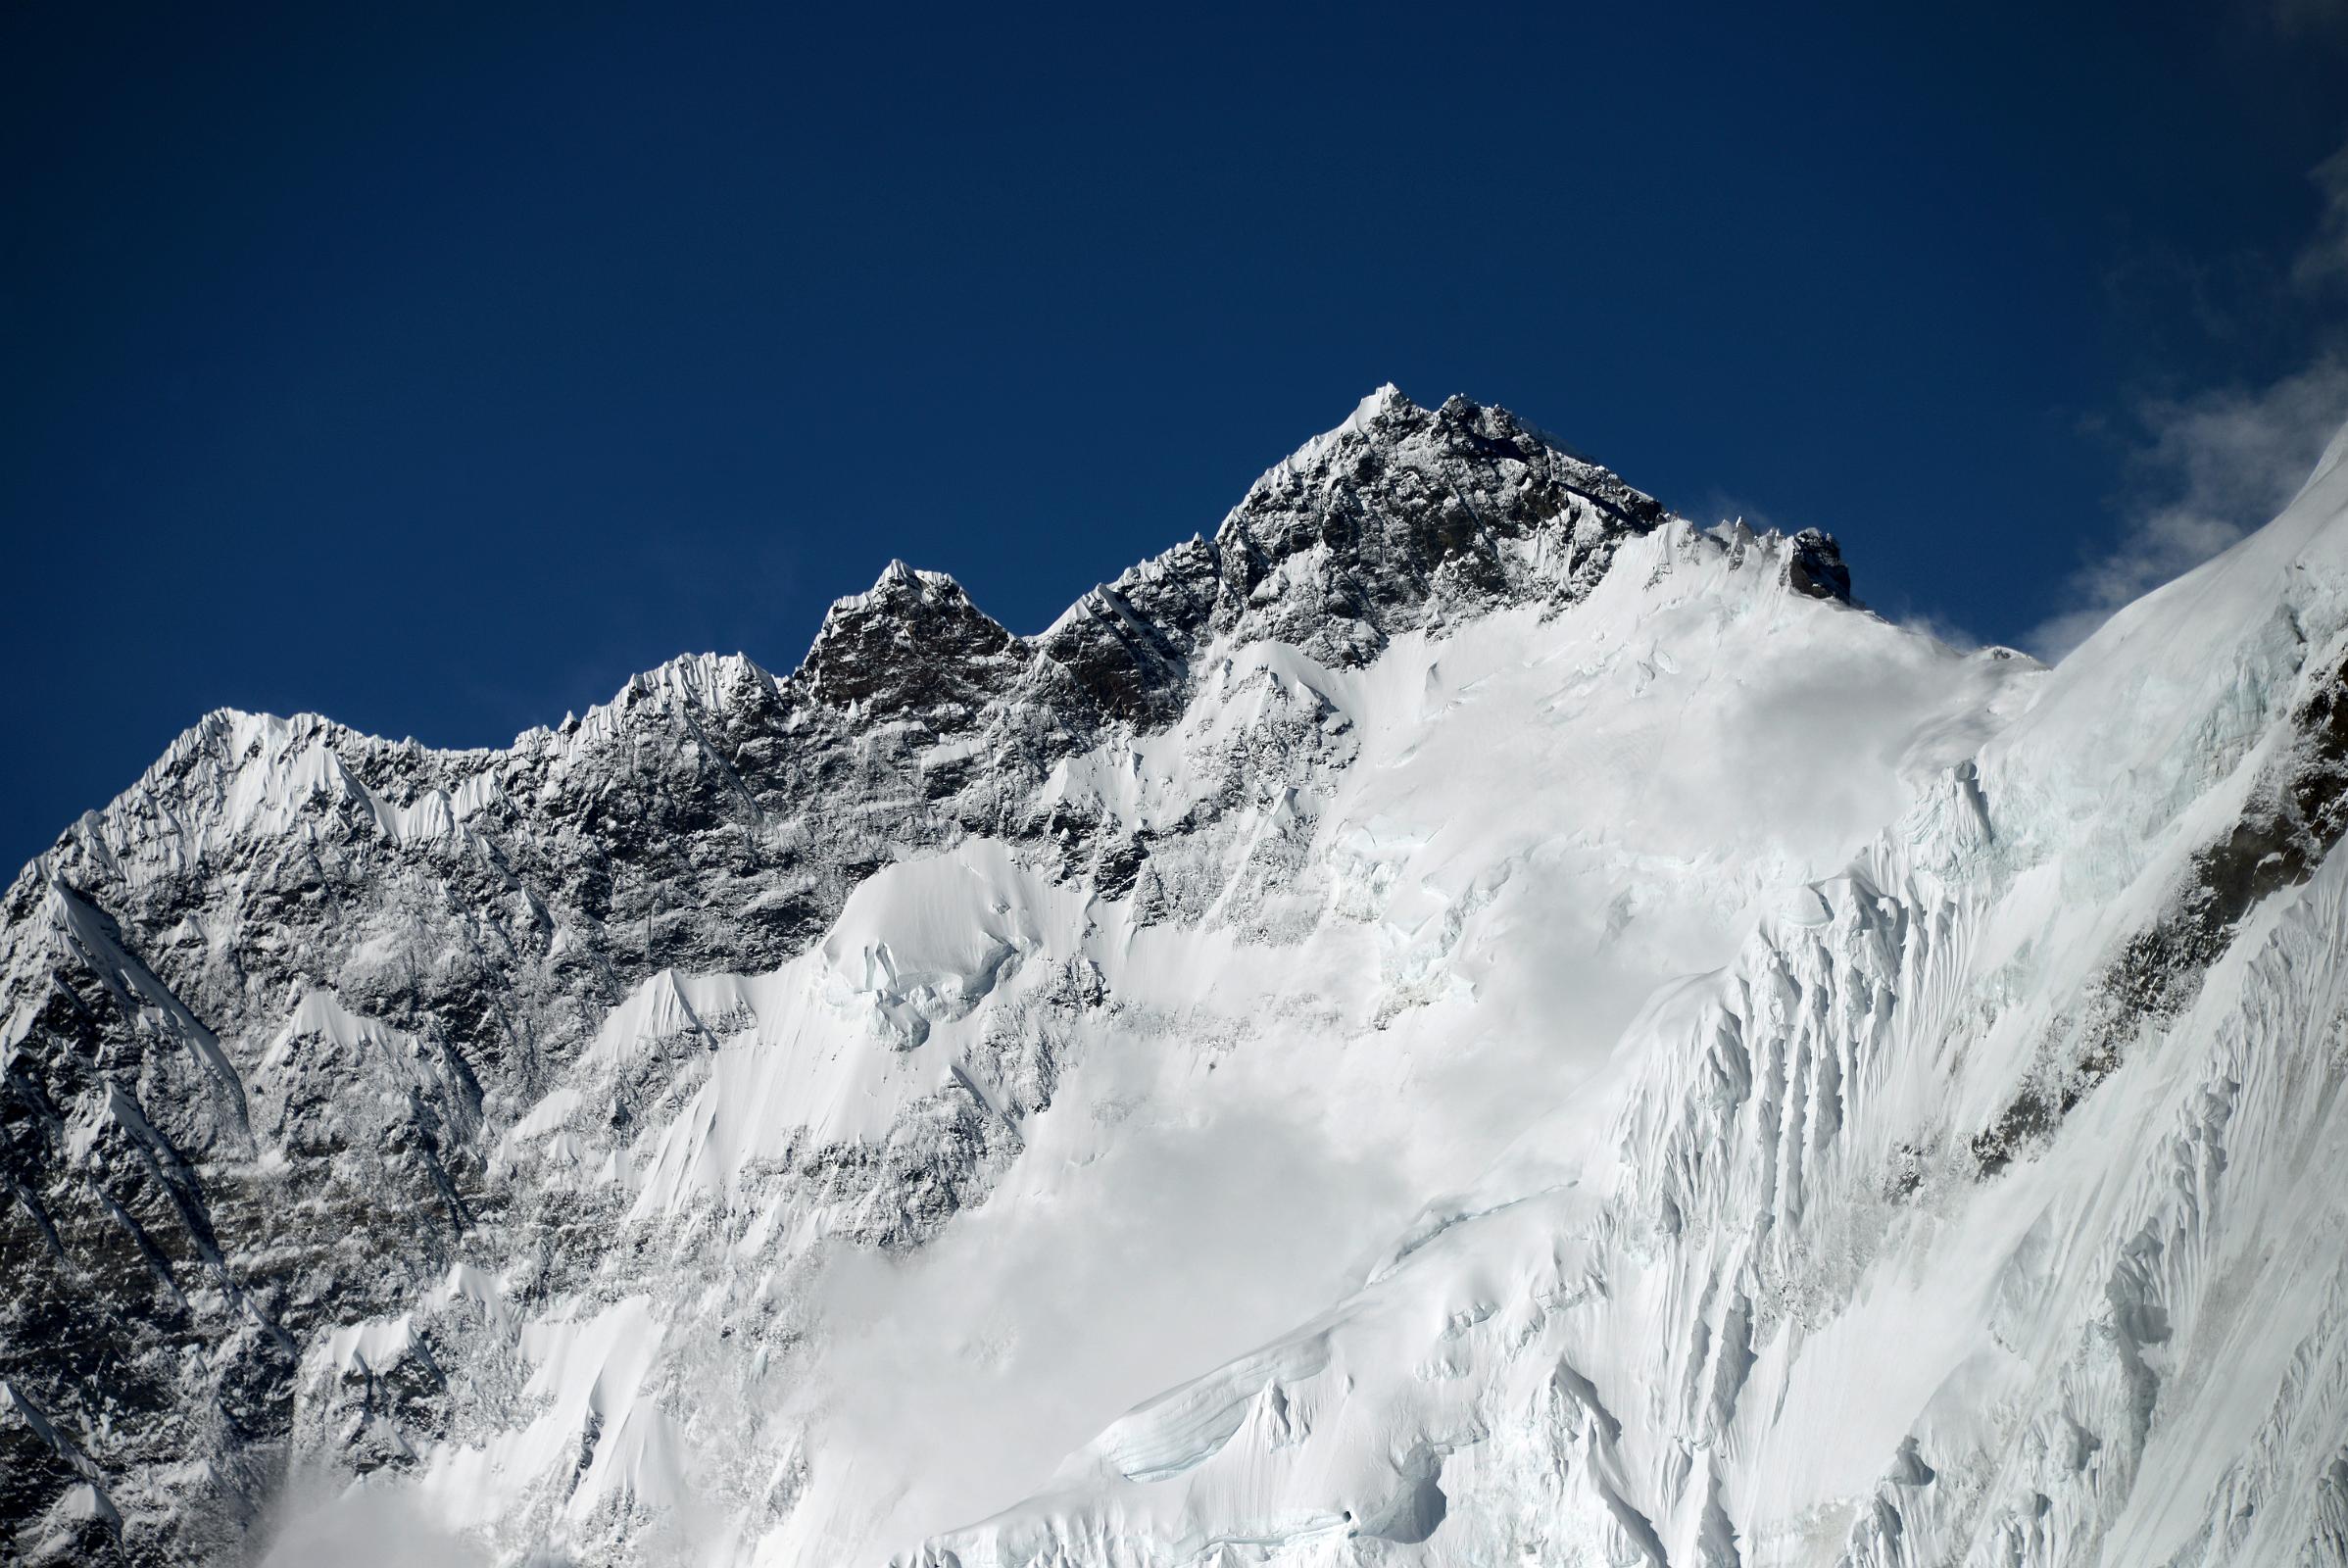 Close-Up of Mount Everest